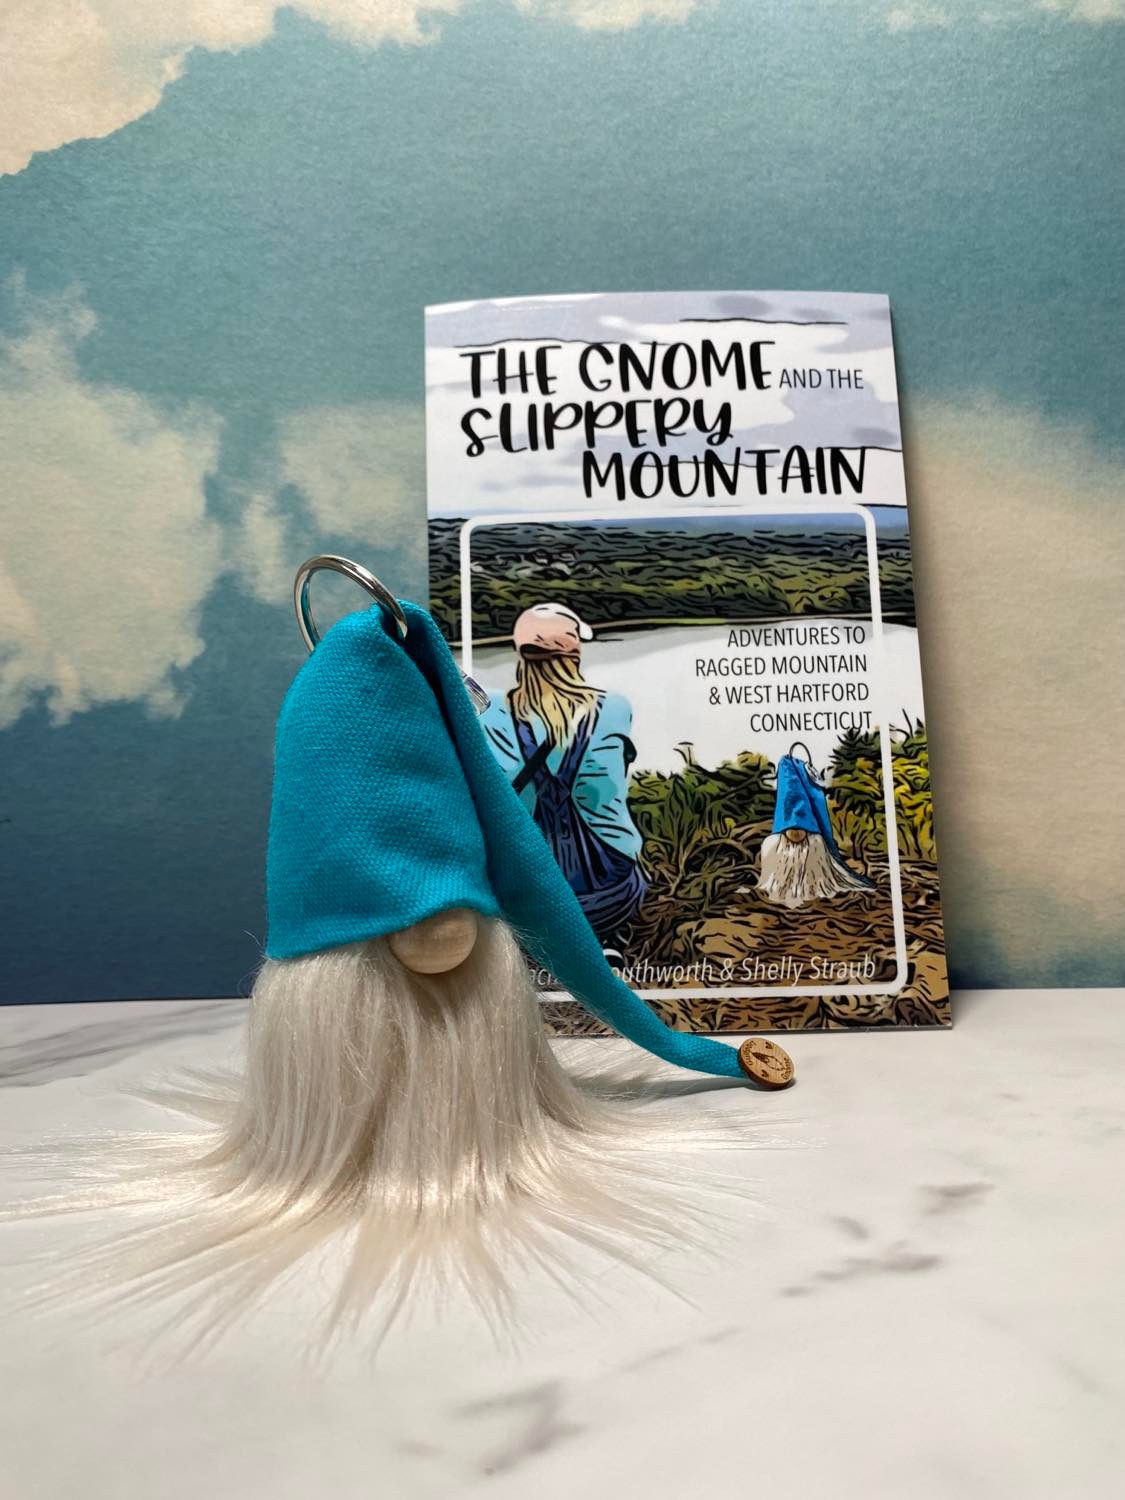 Book and Gnome Gift Set - Plush Adventure Gnome and Children's Story Book-The Gnome and the Slippery Mountain